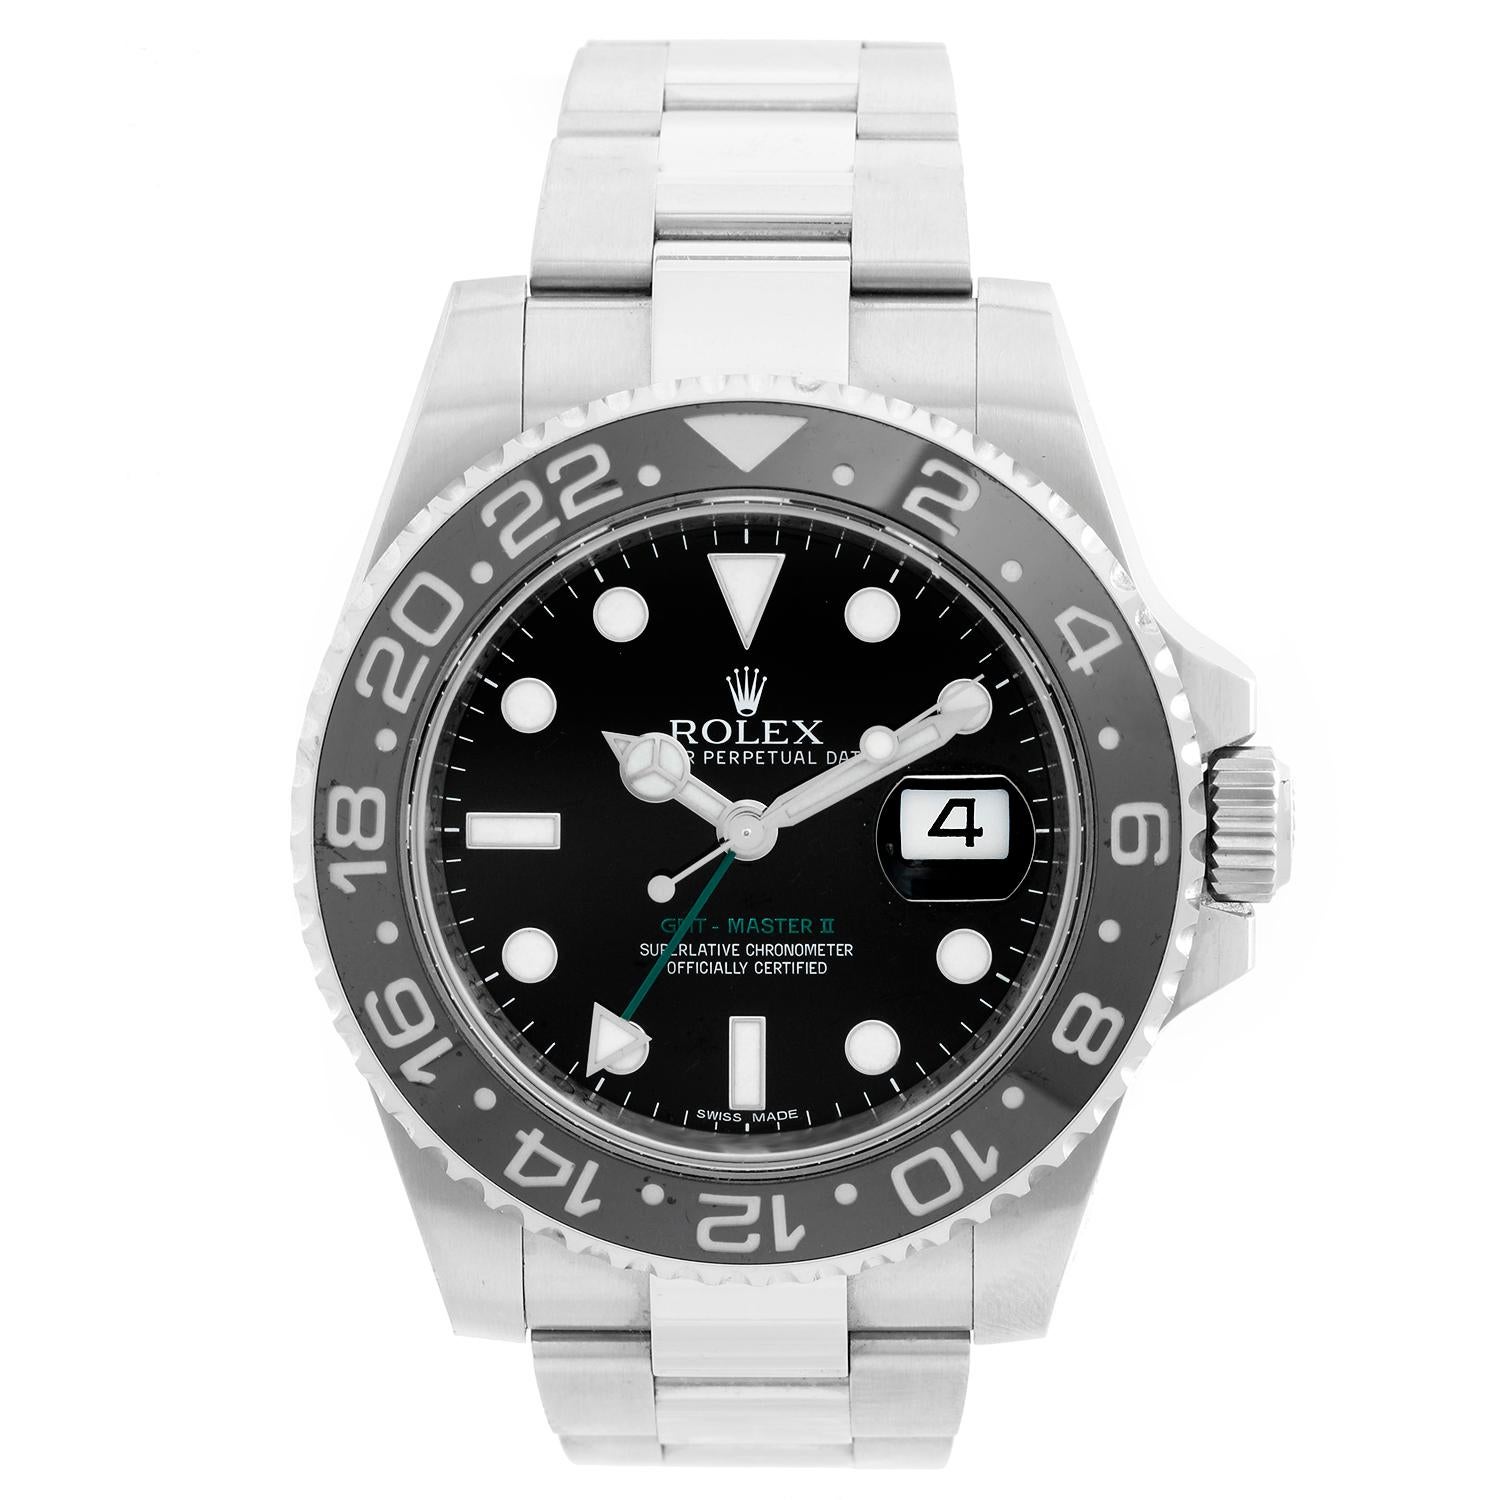 Men's Rolex GMT-Master II Watch 116710LN - Automatic winding, 31 jewels. Stainless steel case with 24 hour ceramic bezel . Black dial with luminous markers; green GMT hand. Stainless steel Oyster bracelet with flip-lock clasp; extra green rubber